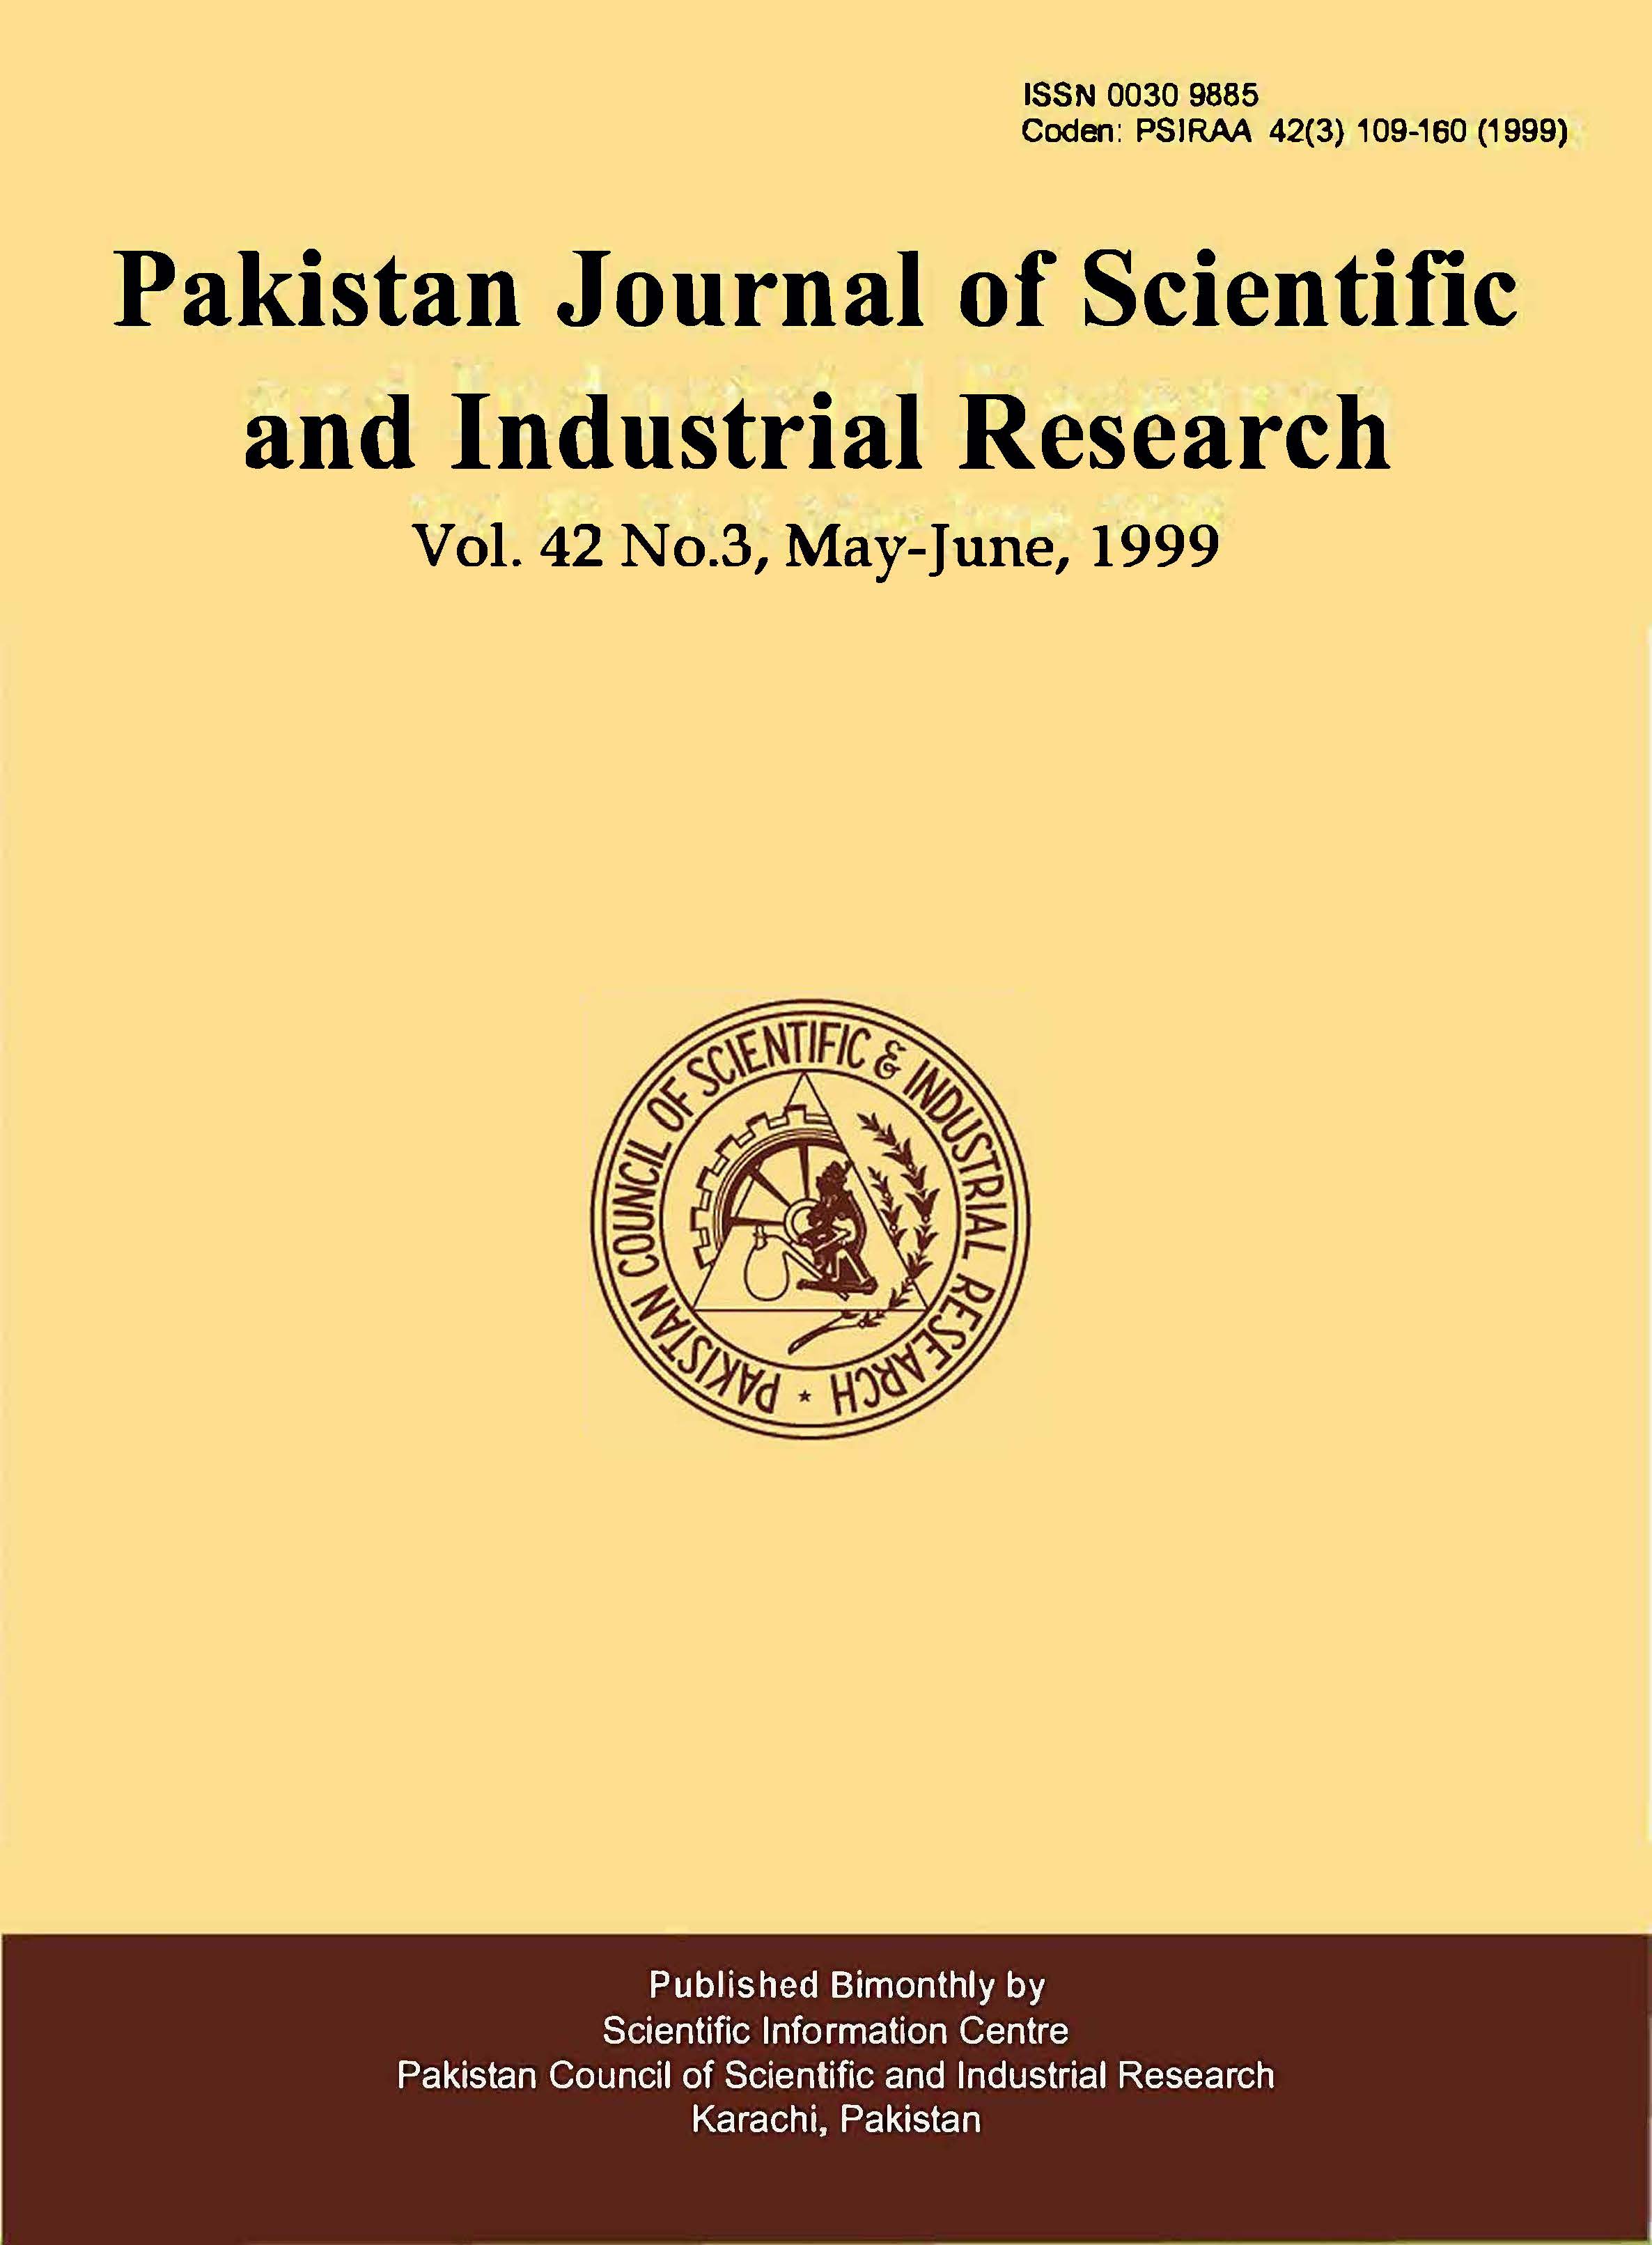 					View Vol. 42 No. 3 (1999): Pakistan Journal of Scientific and Industrial Research
				